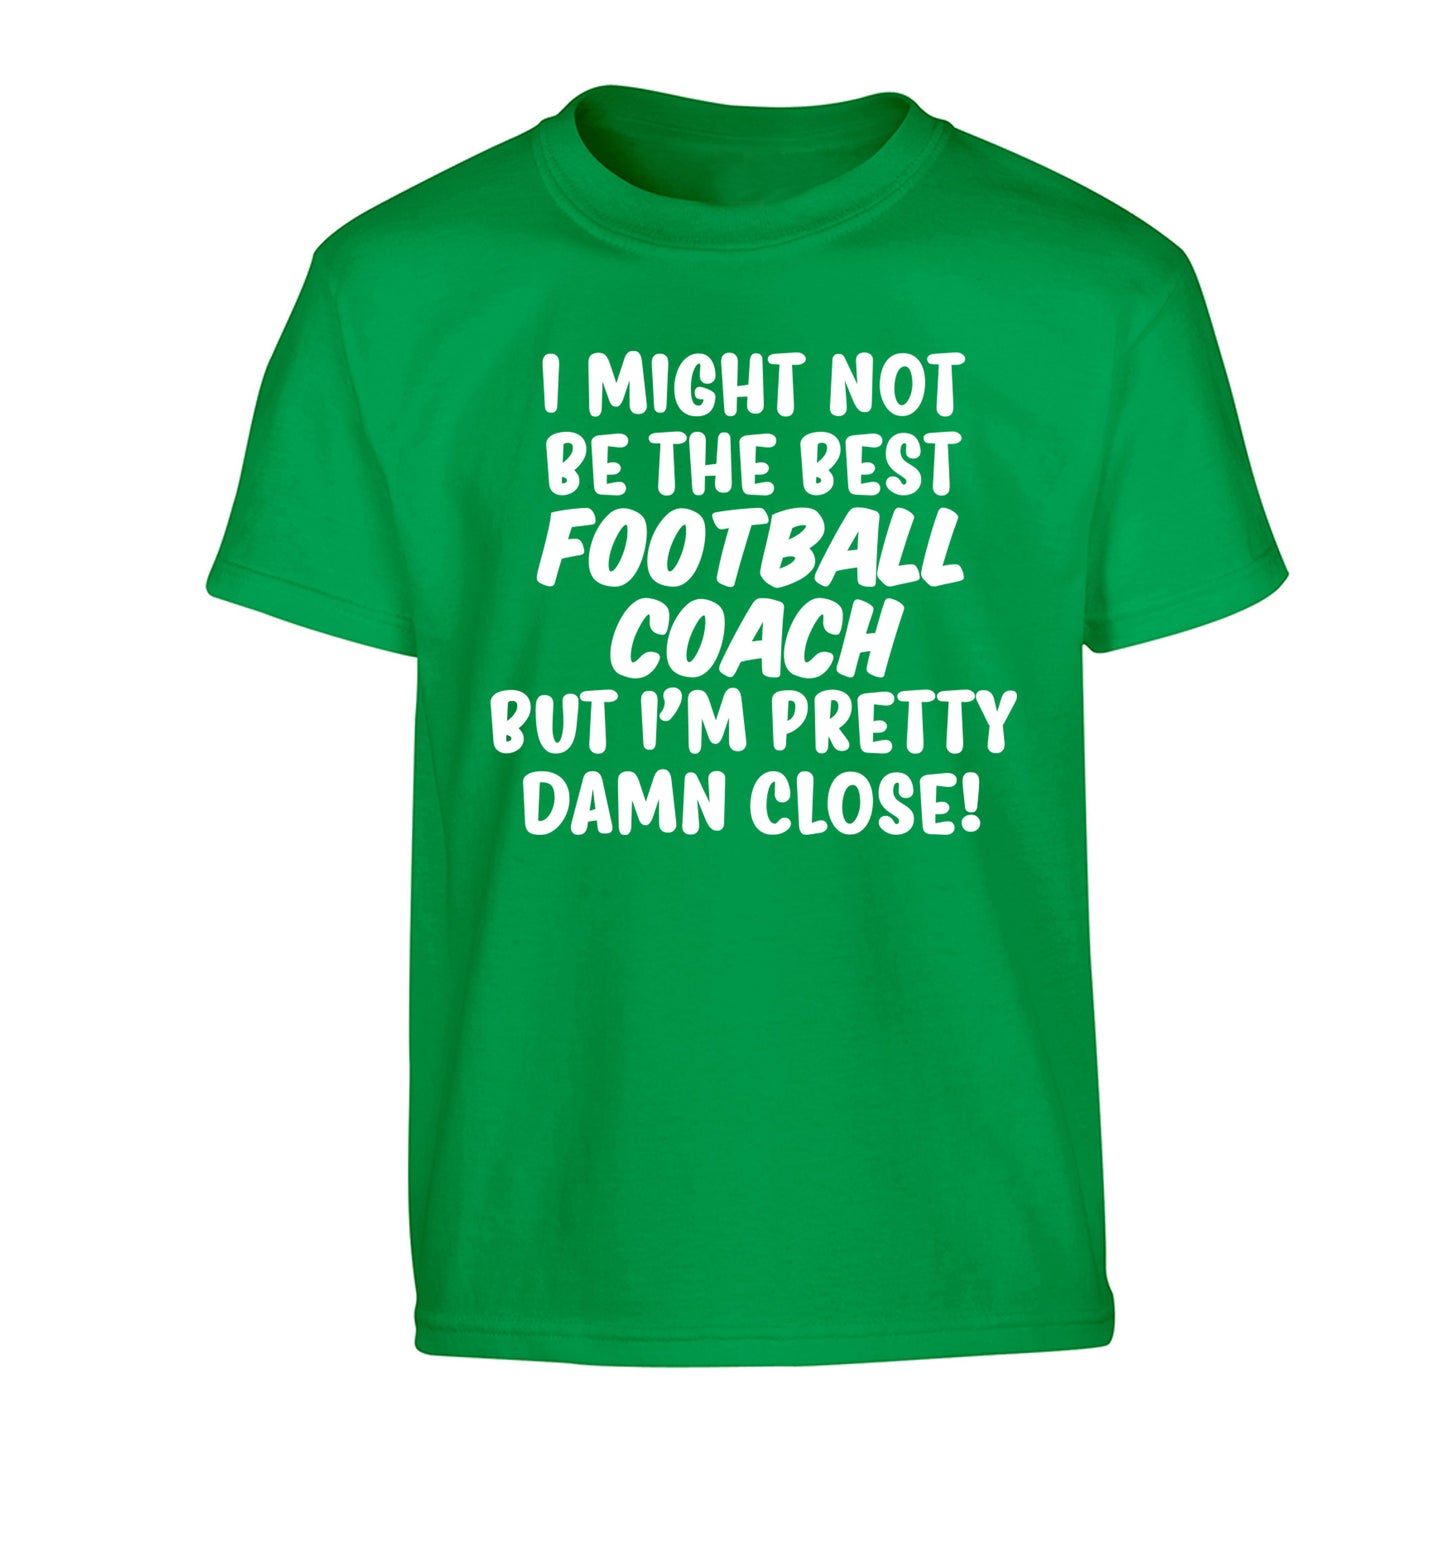 I might not be the best football coach but I'm pretty close! Children's green Tshirt 12-14 Years